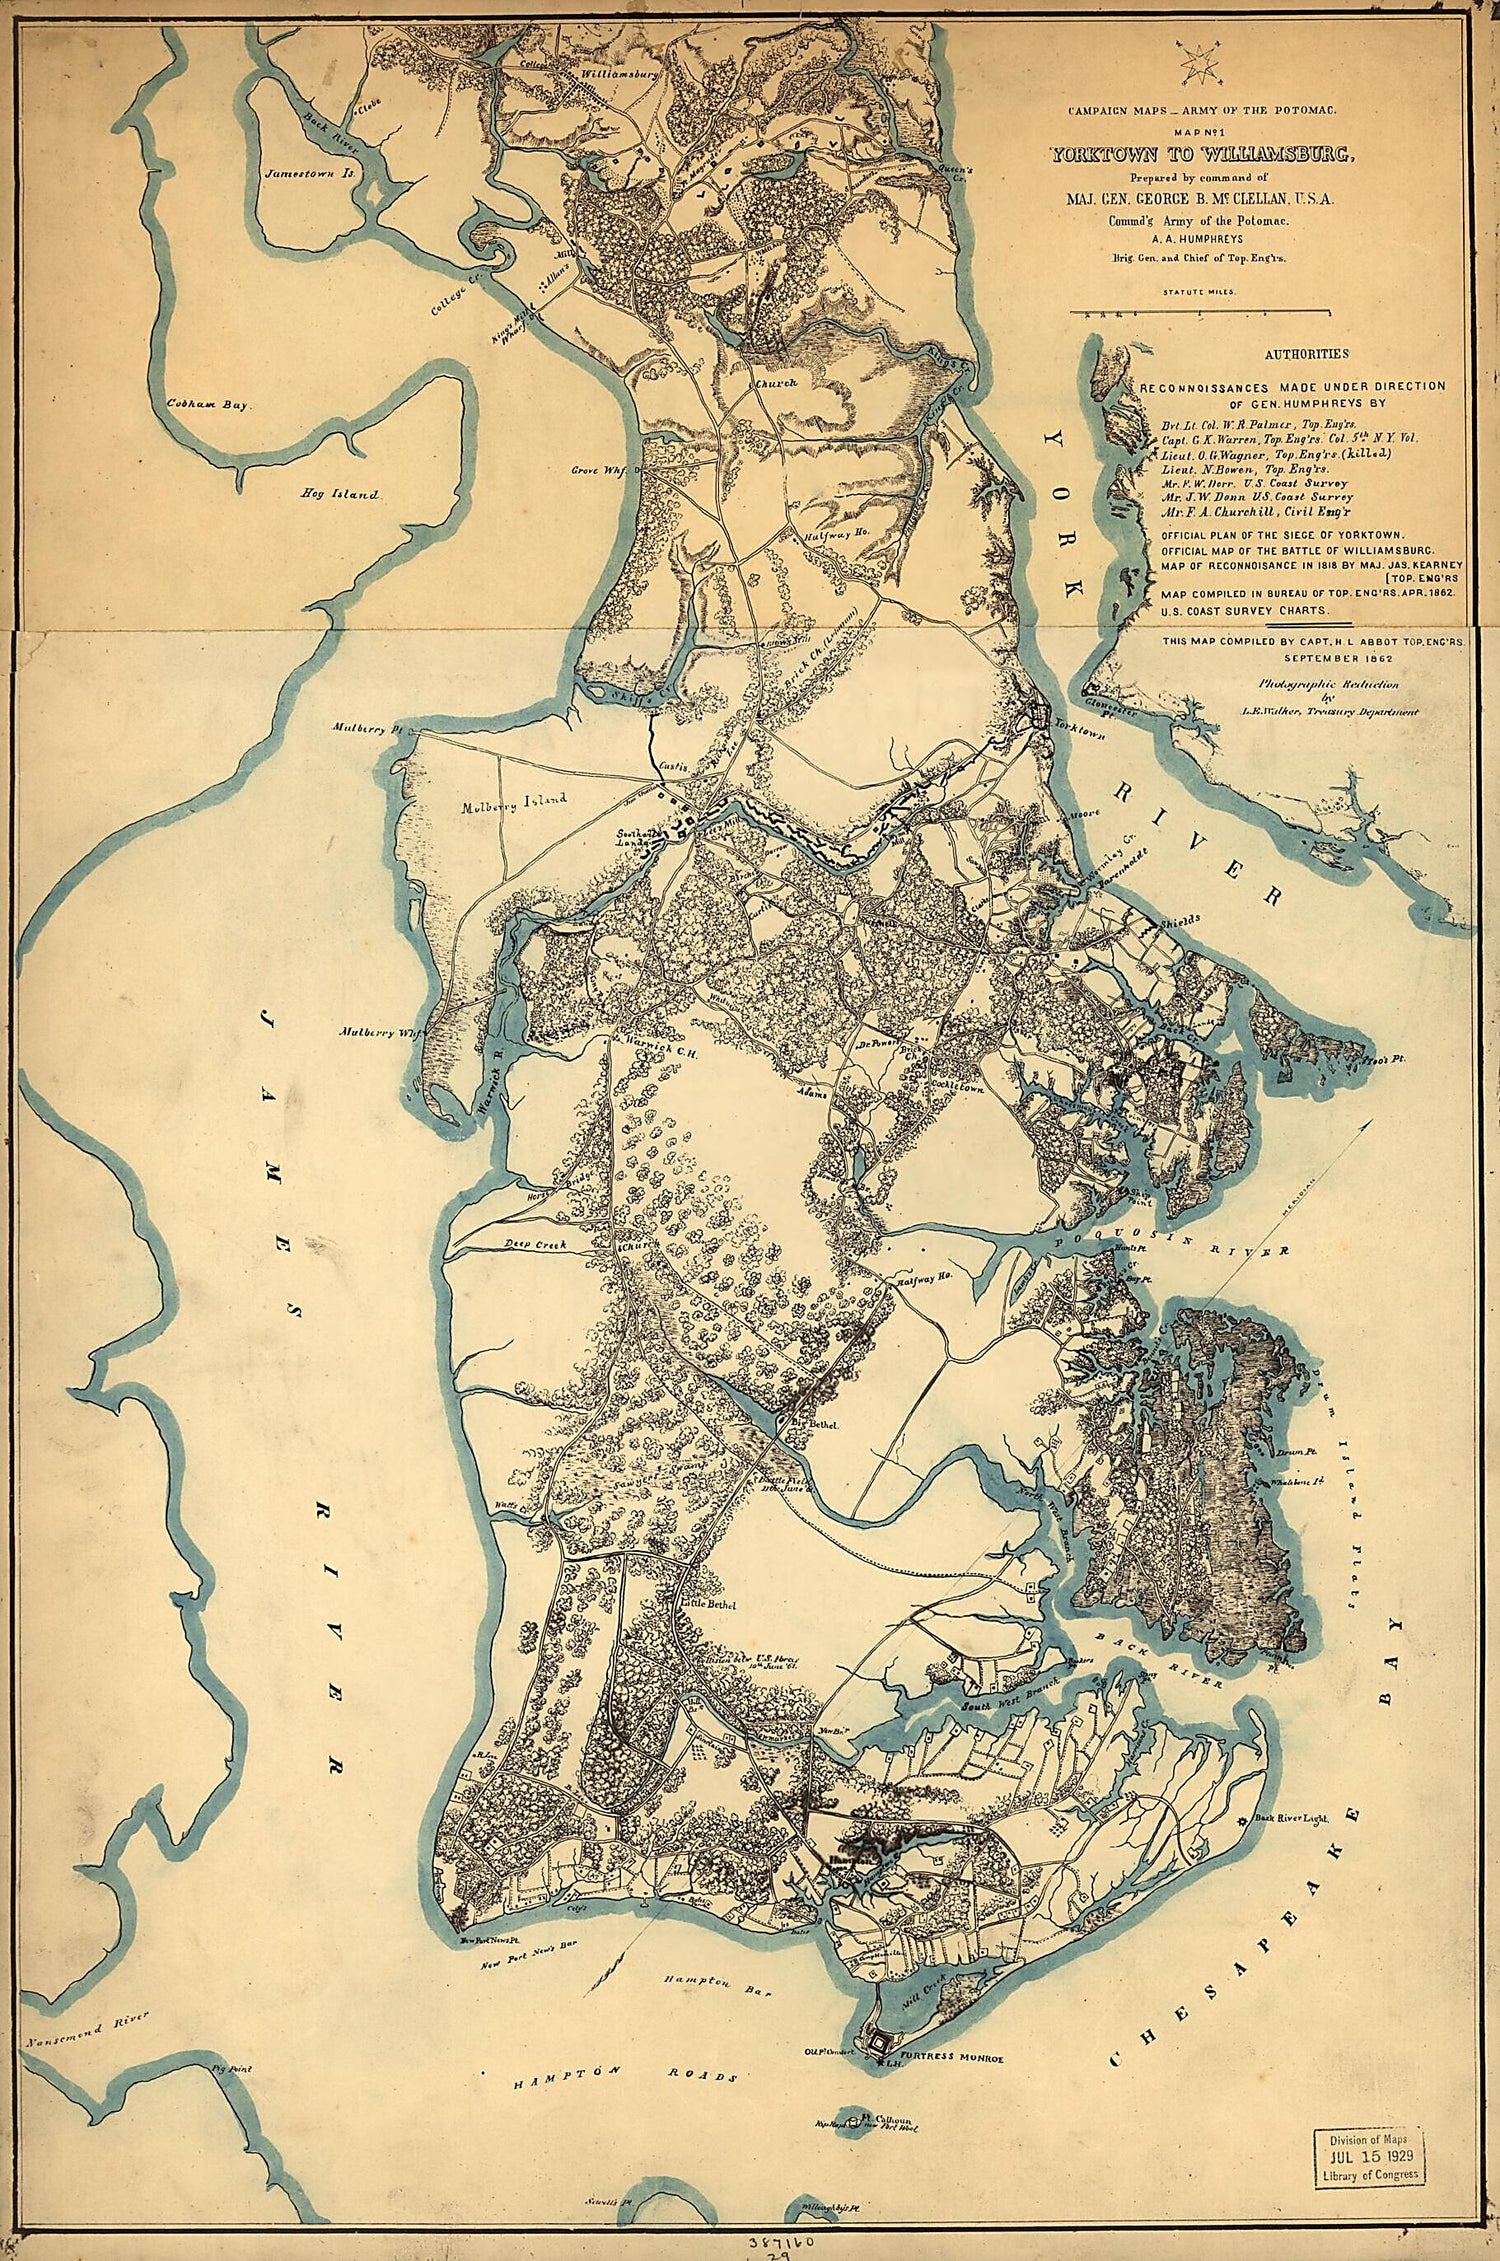 This old map of Yorktown to Williamsburg from 1862 was created by Henry L. Abbot in 1862